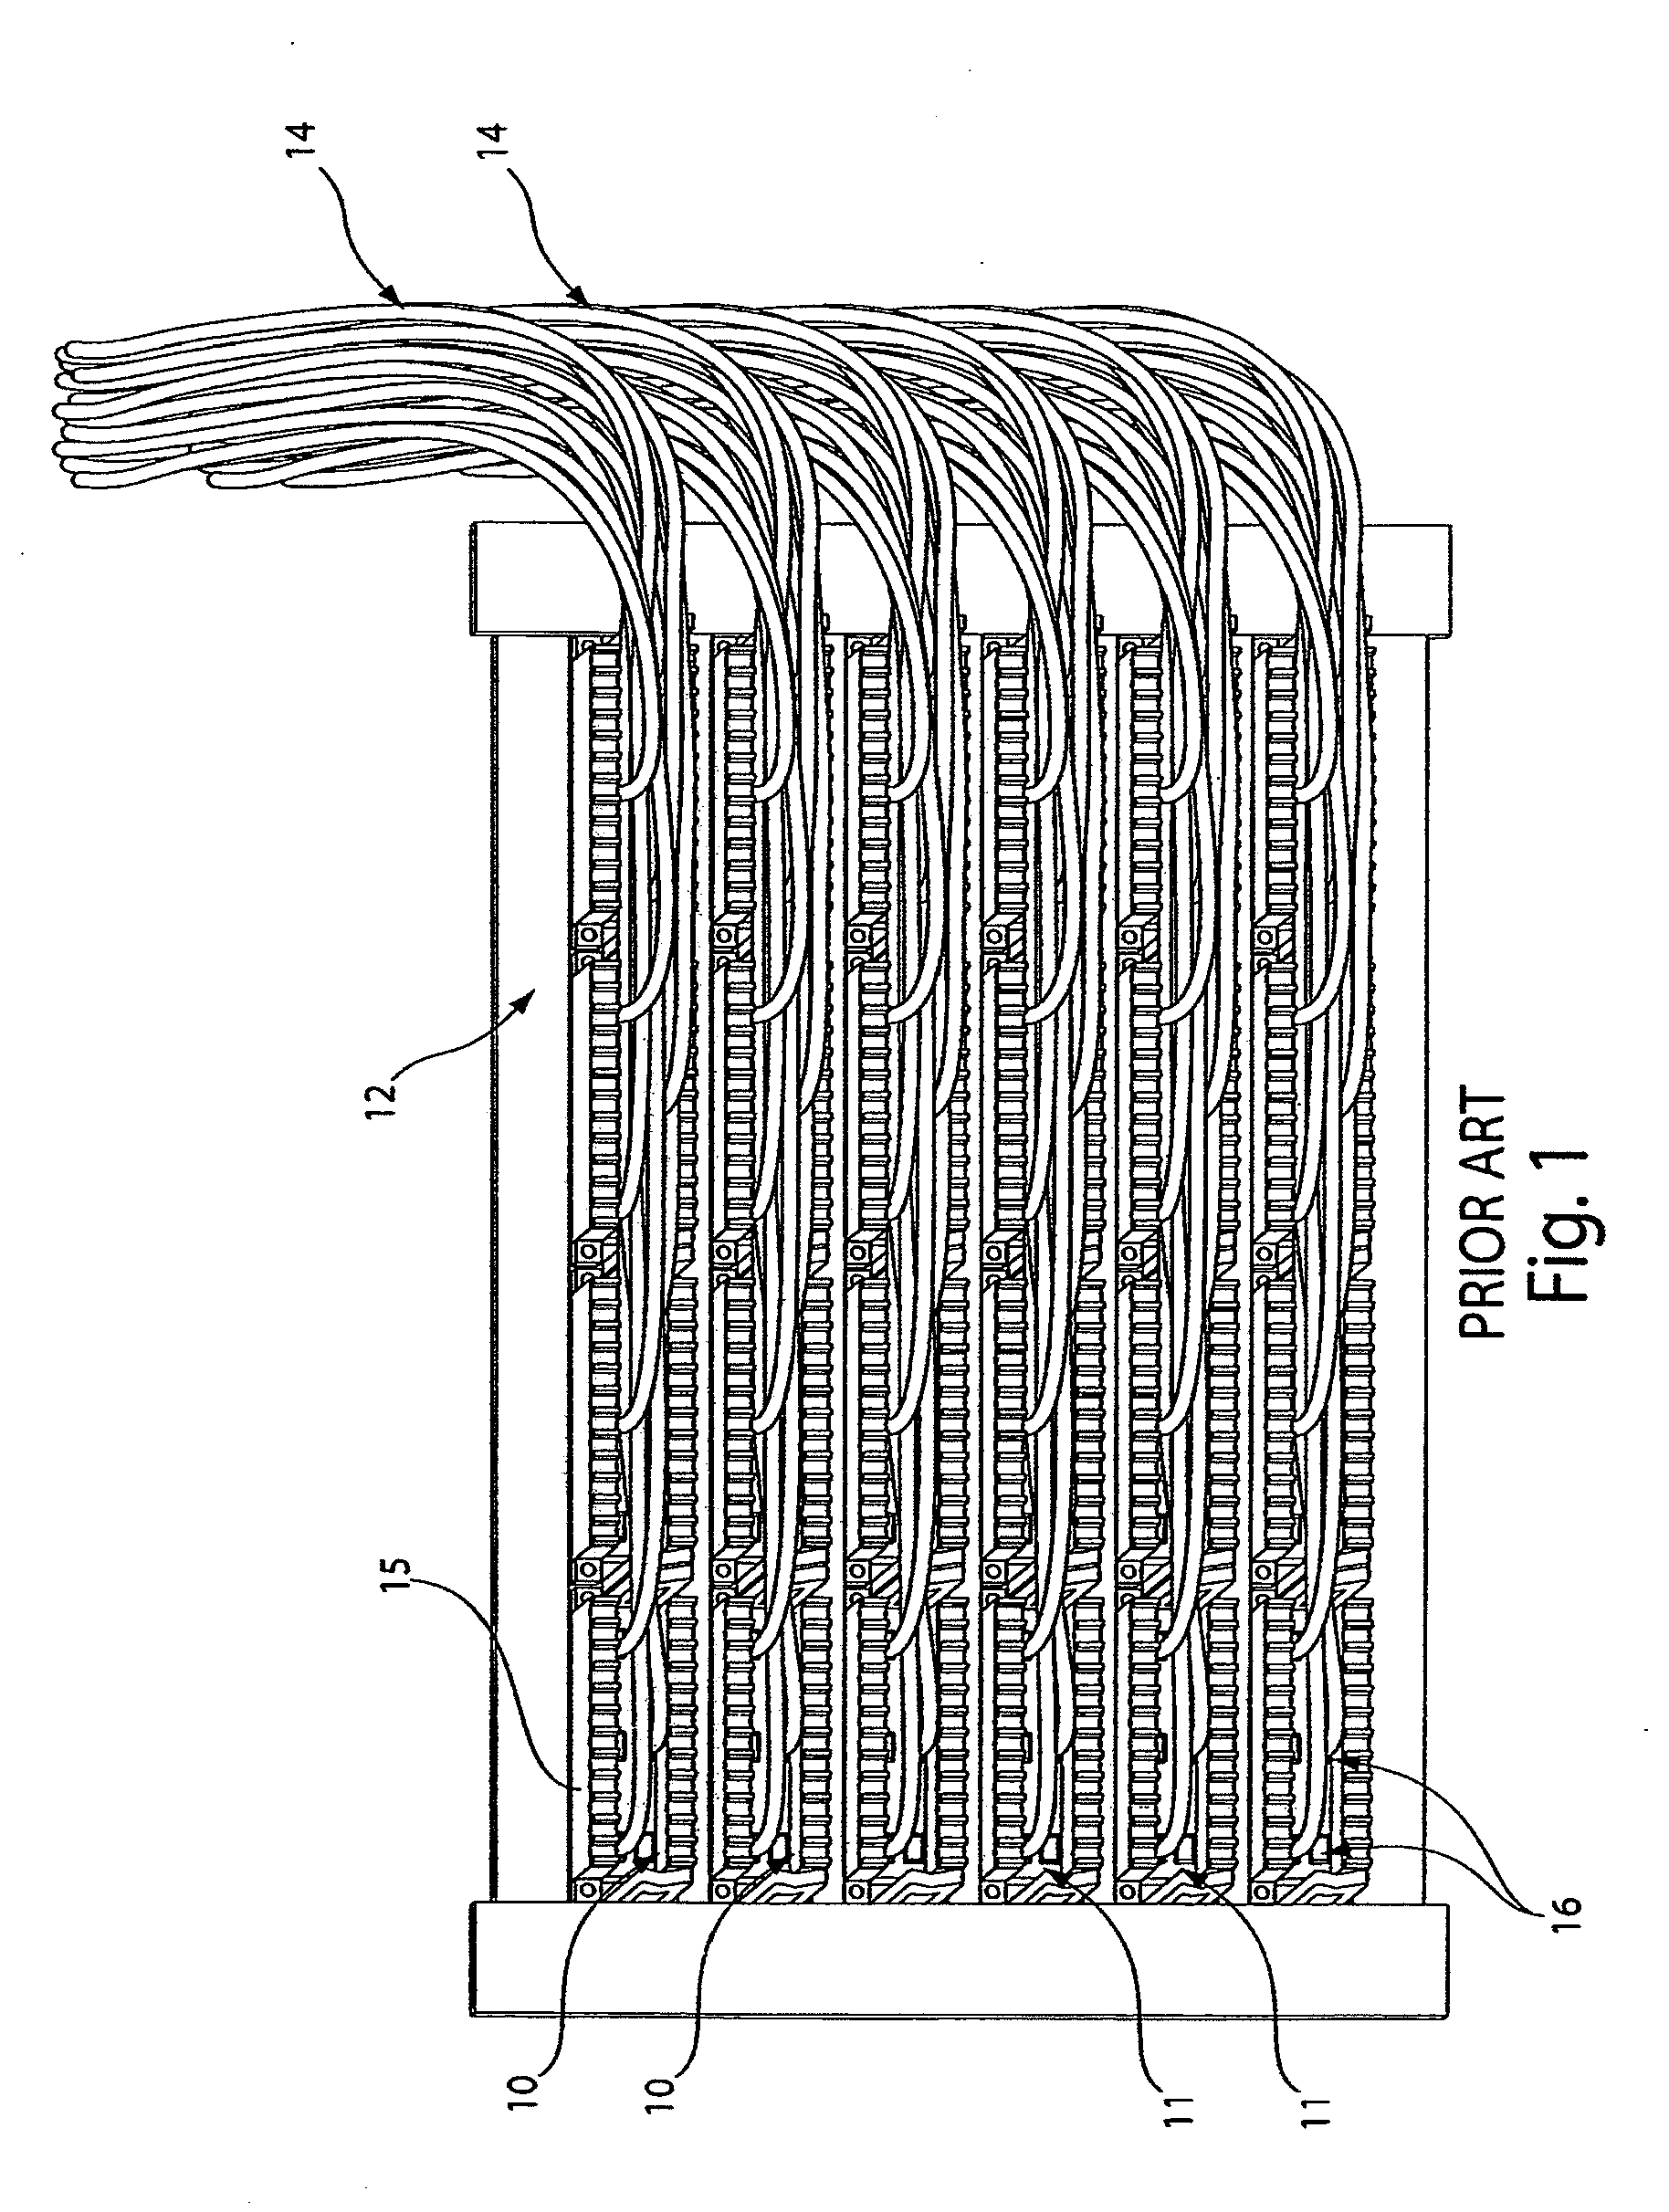 Multi-port cabling system and method